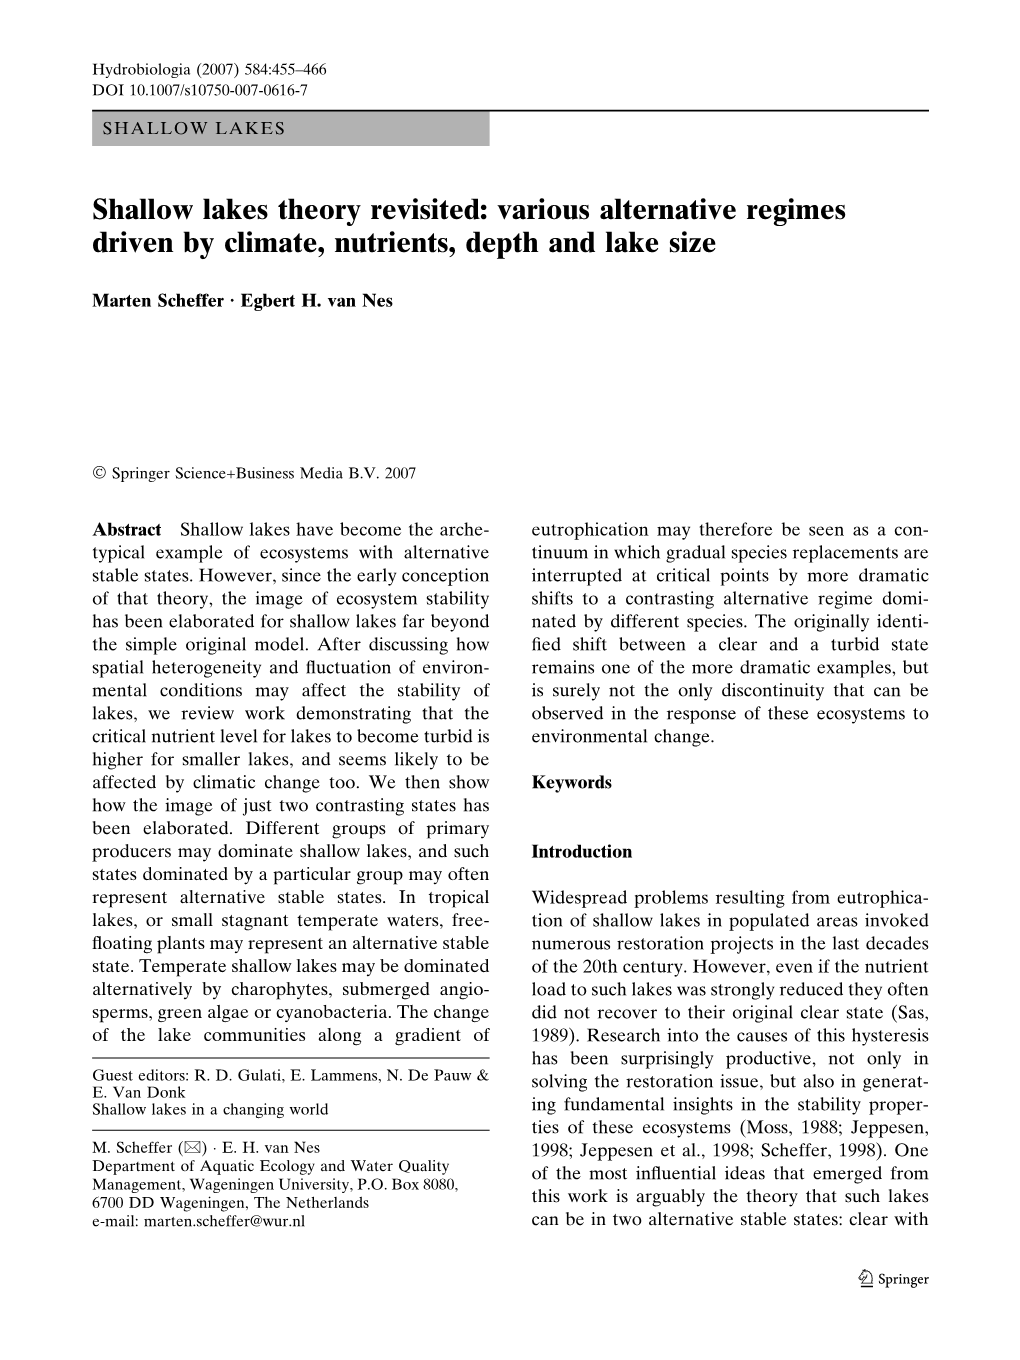 Shallow Lakes Theory Revisited: Various Alternative Regimes Driven by Climate, Nutrients, Depth and Lake Size